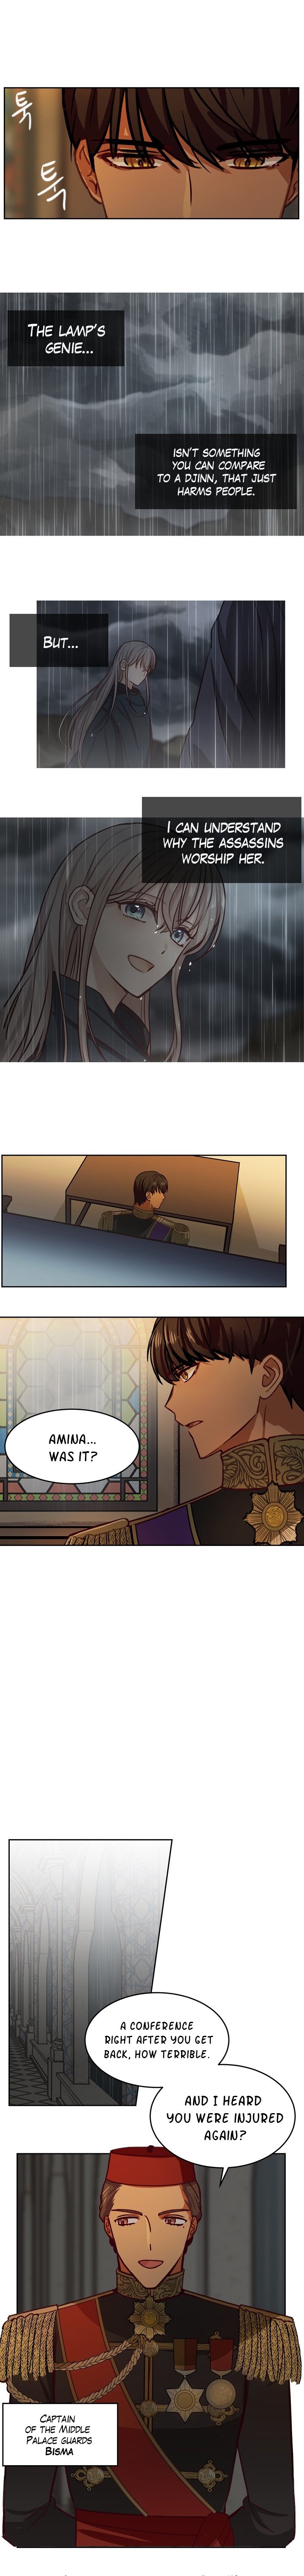 Amina Of The Lamp chapter 8